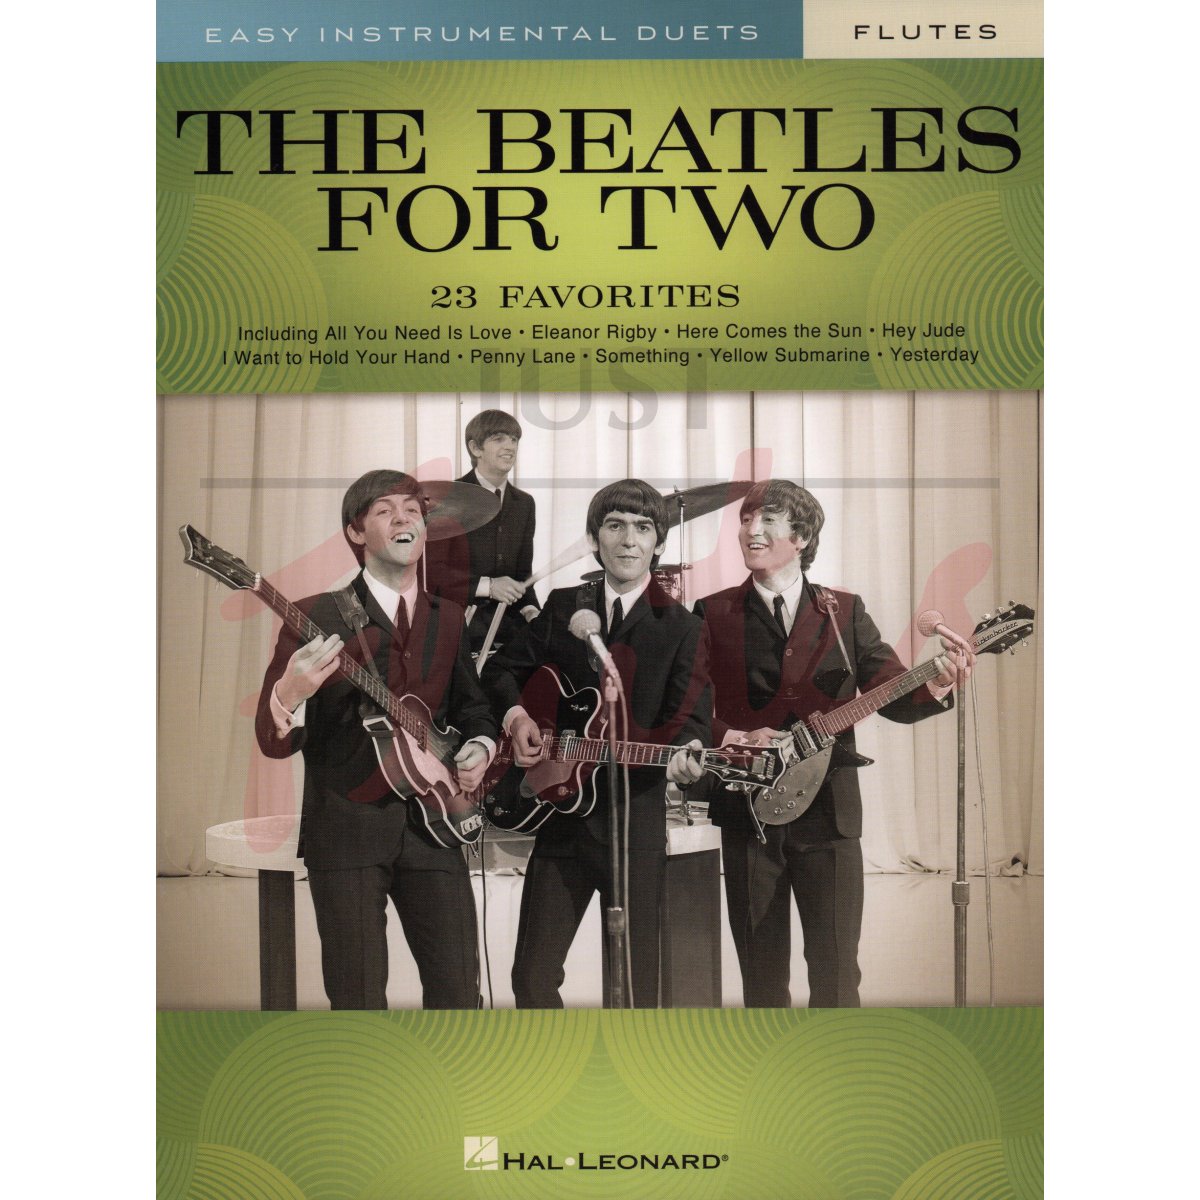 The Beatles for Two Flutes